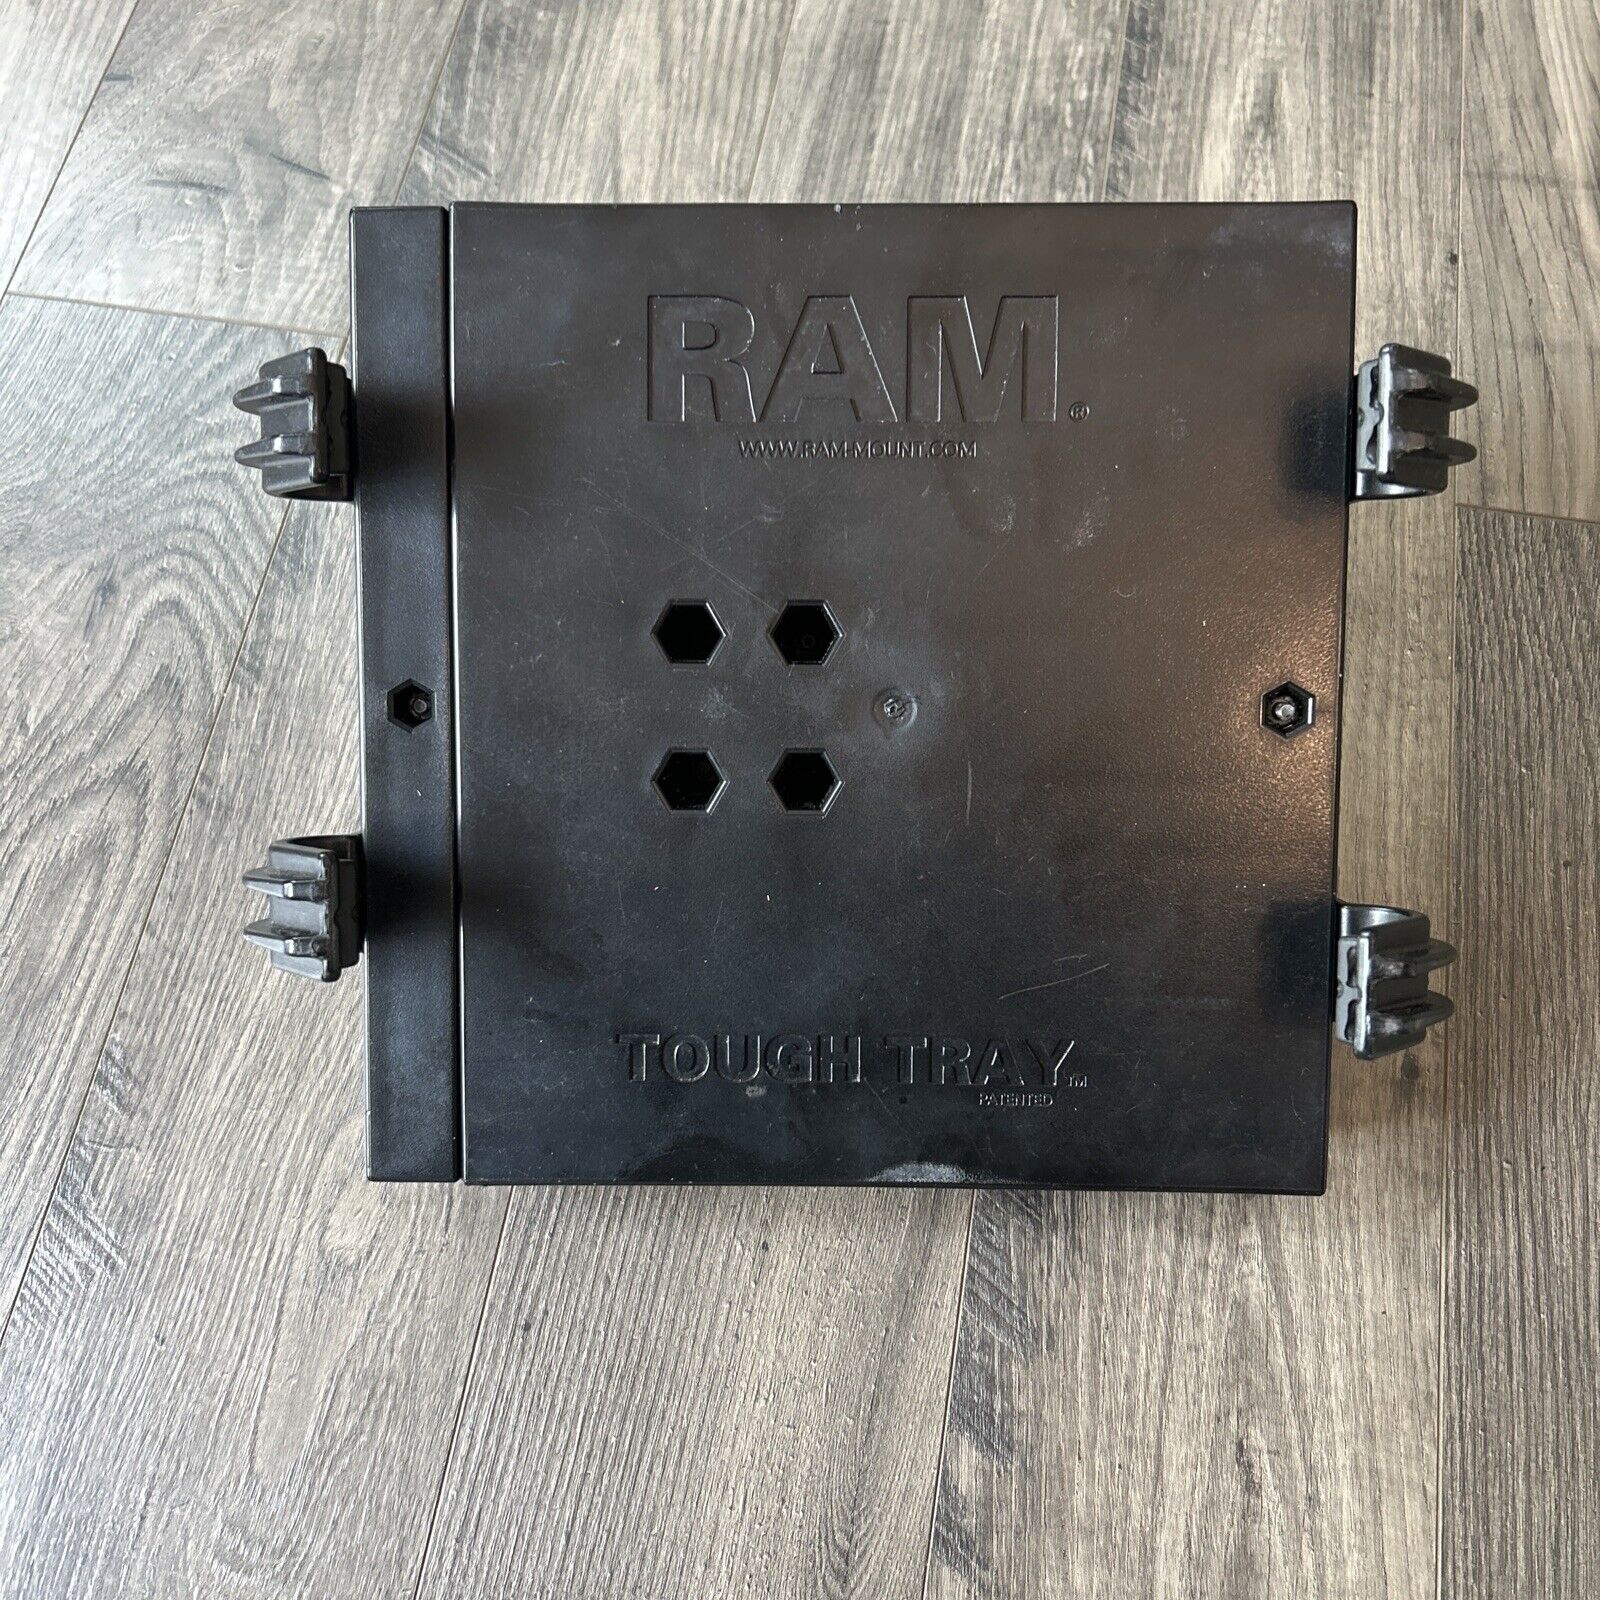 RAM-234-3 RAM Mounts Tough-Tray Laptop Holder With Mounting Ball. Used.